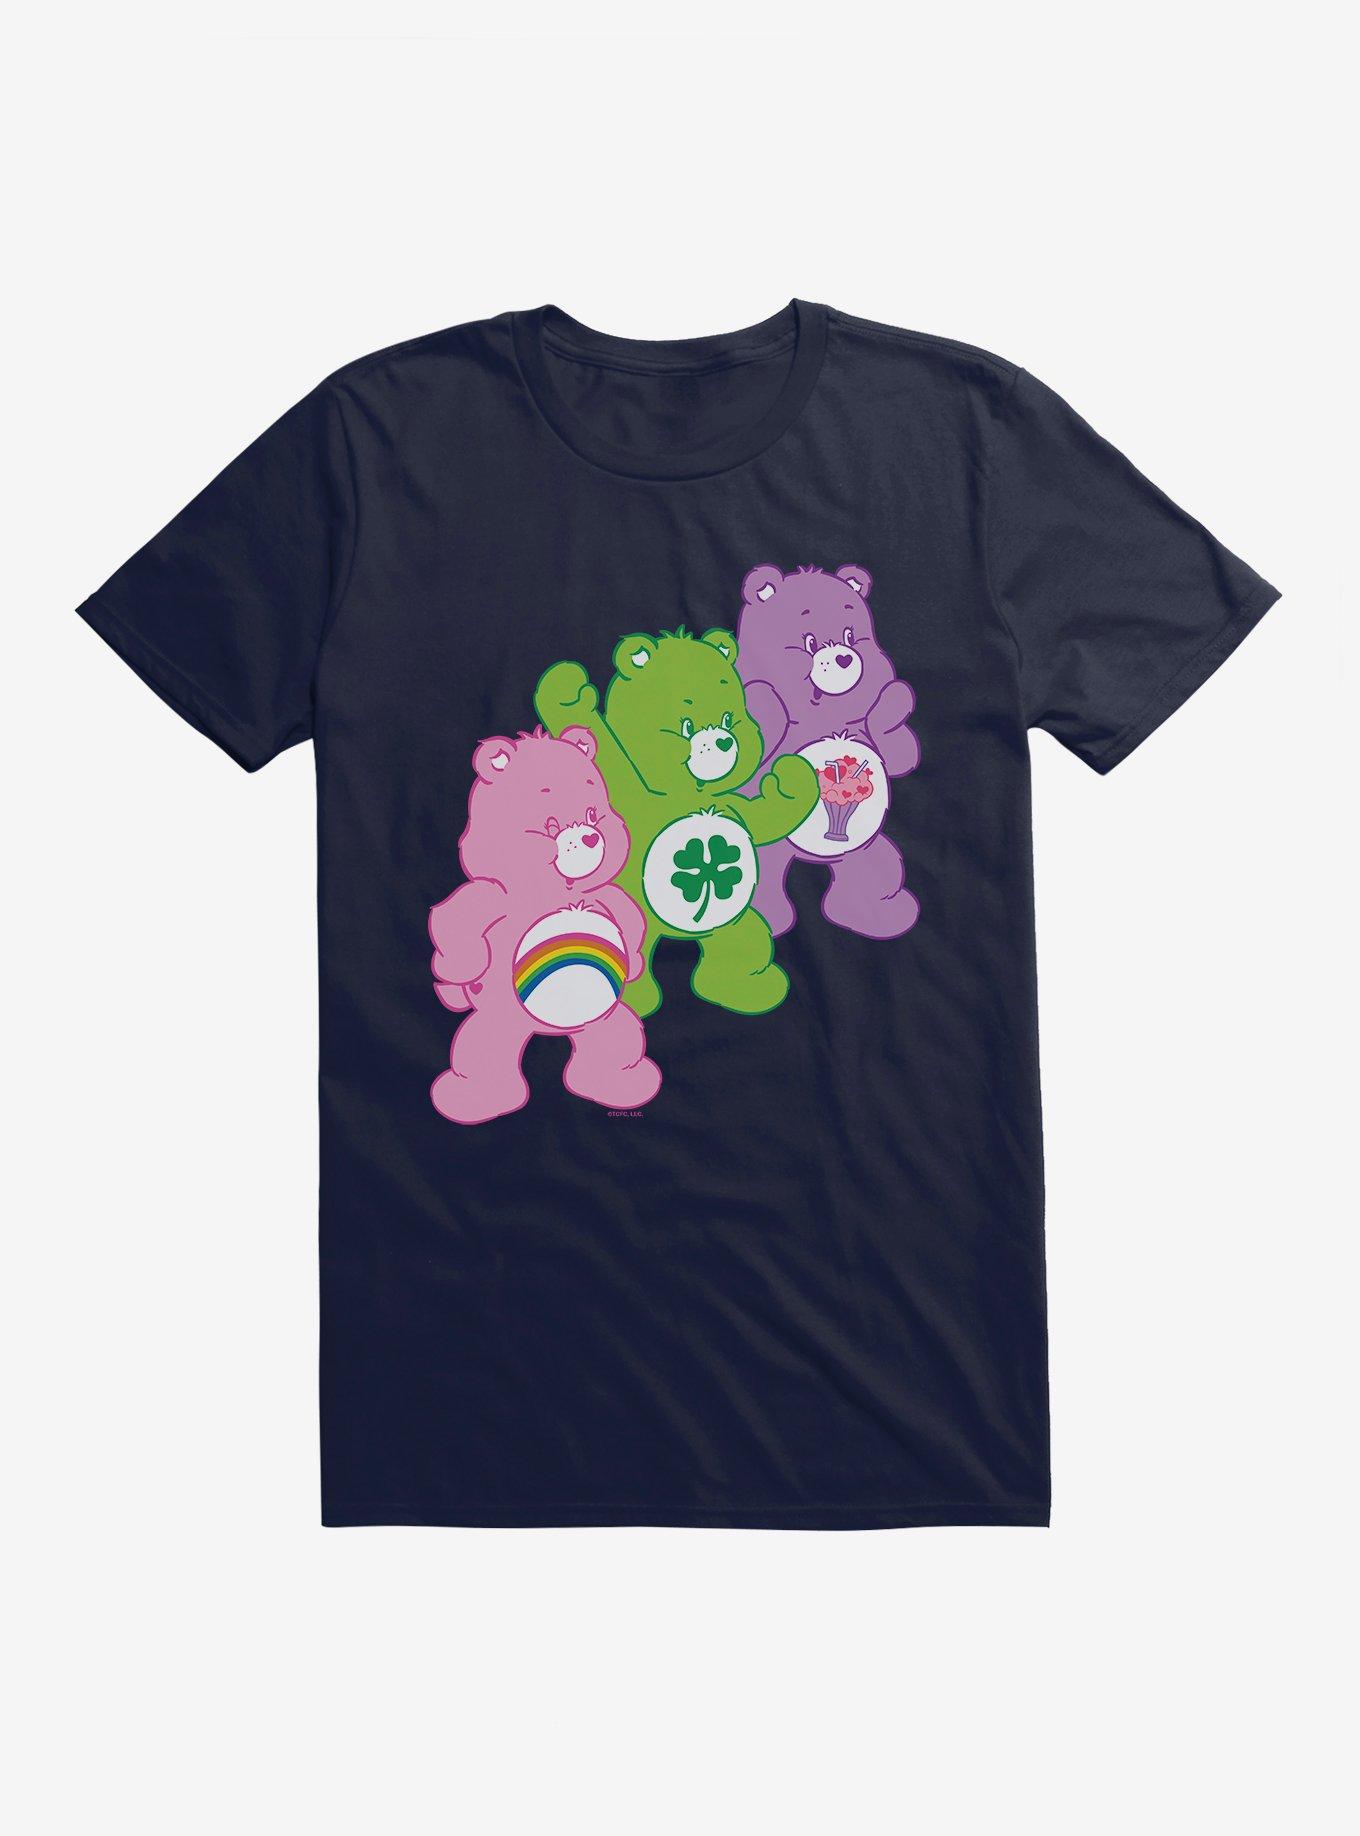 Care Bears Cheer Luck And Sharing T-Shirt | Hot Topic